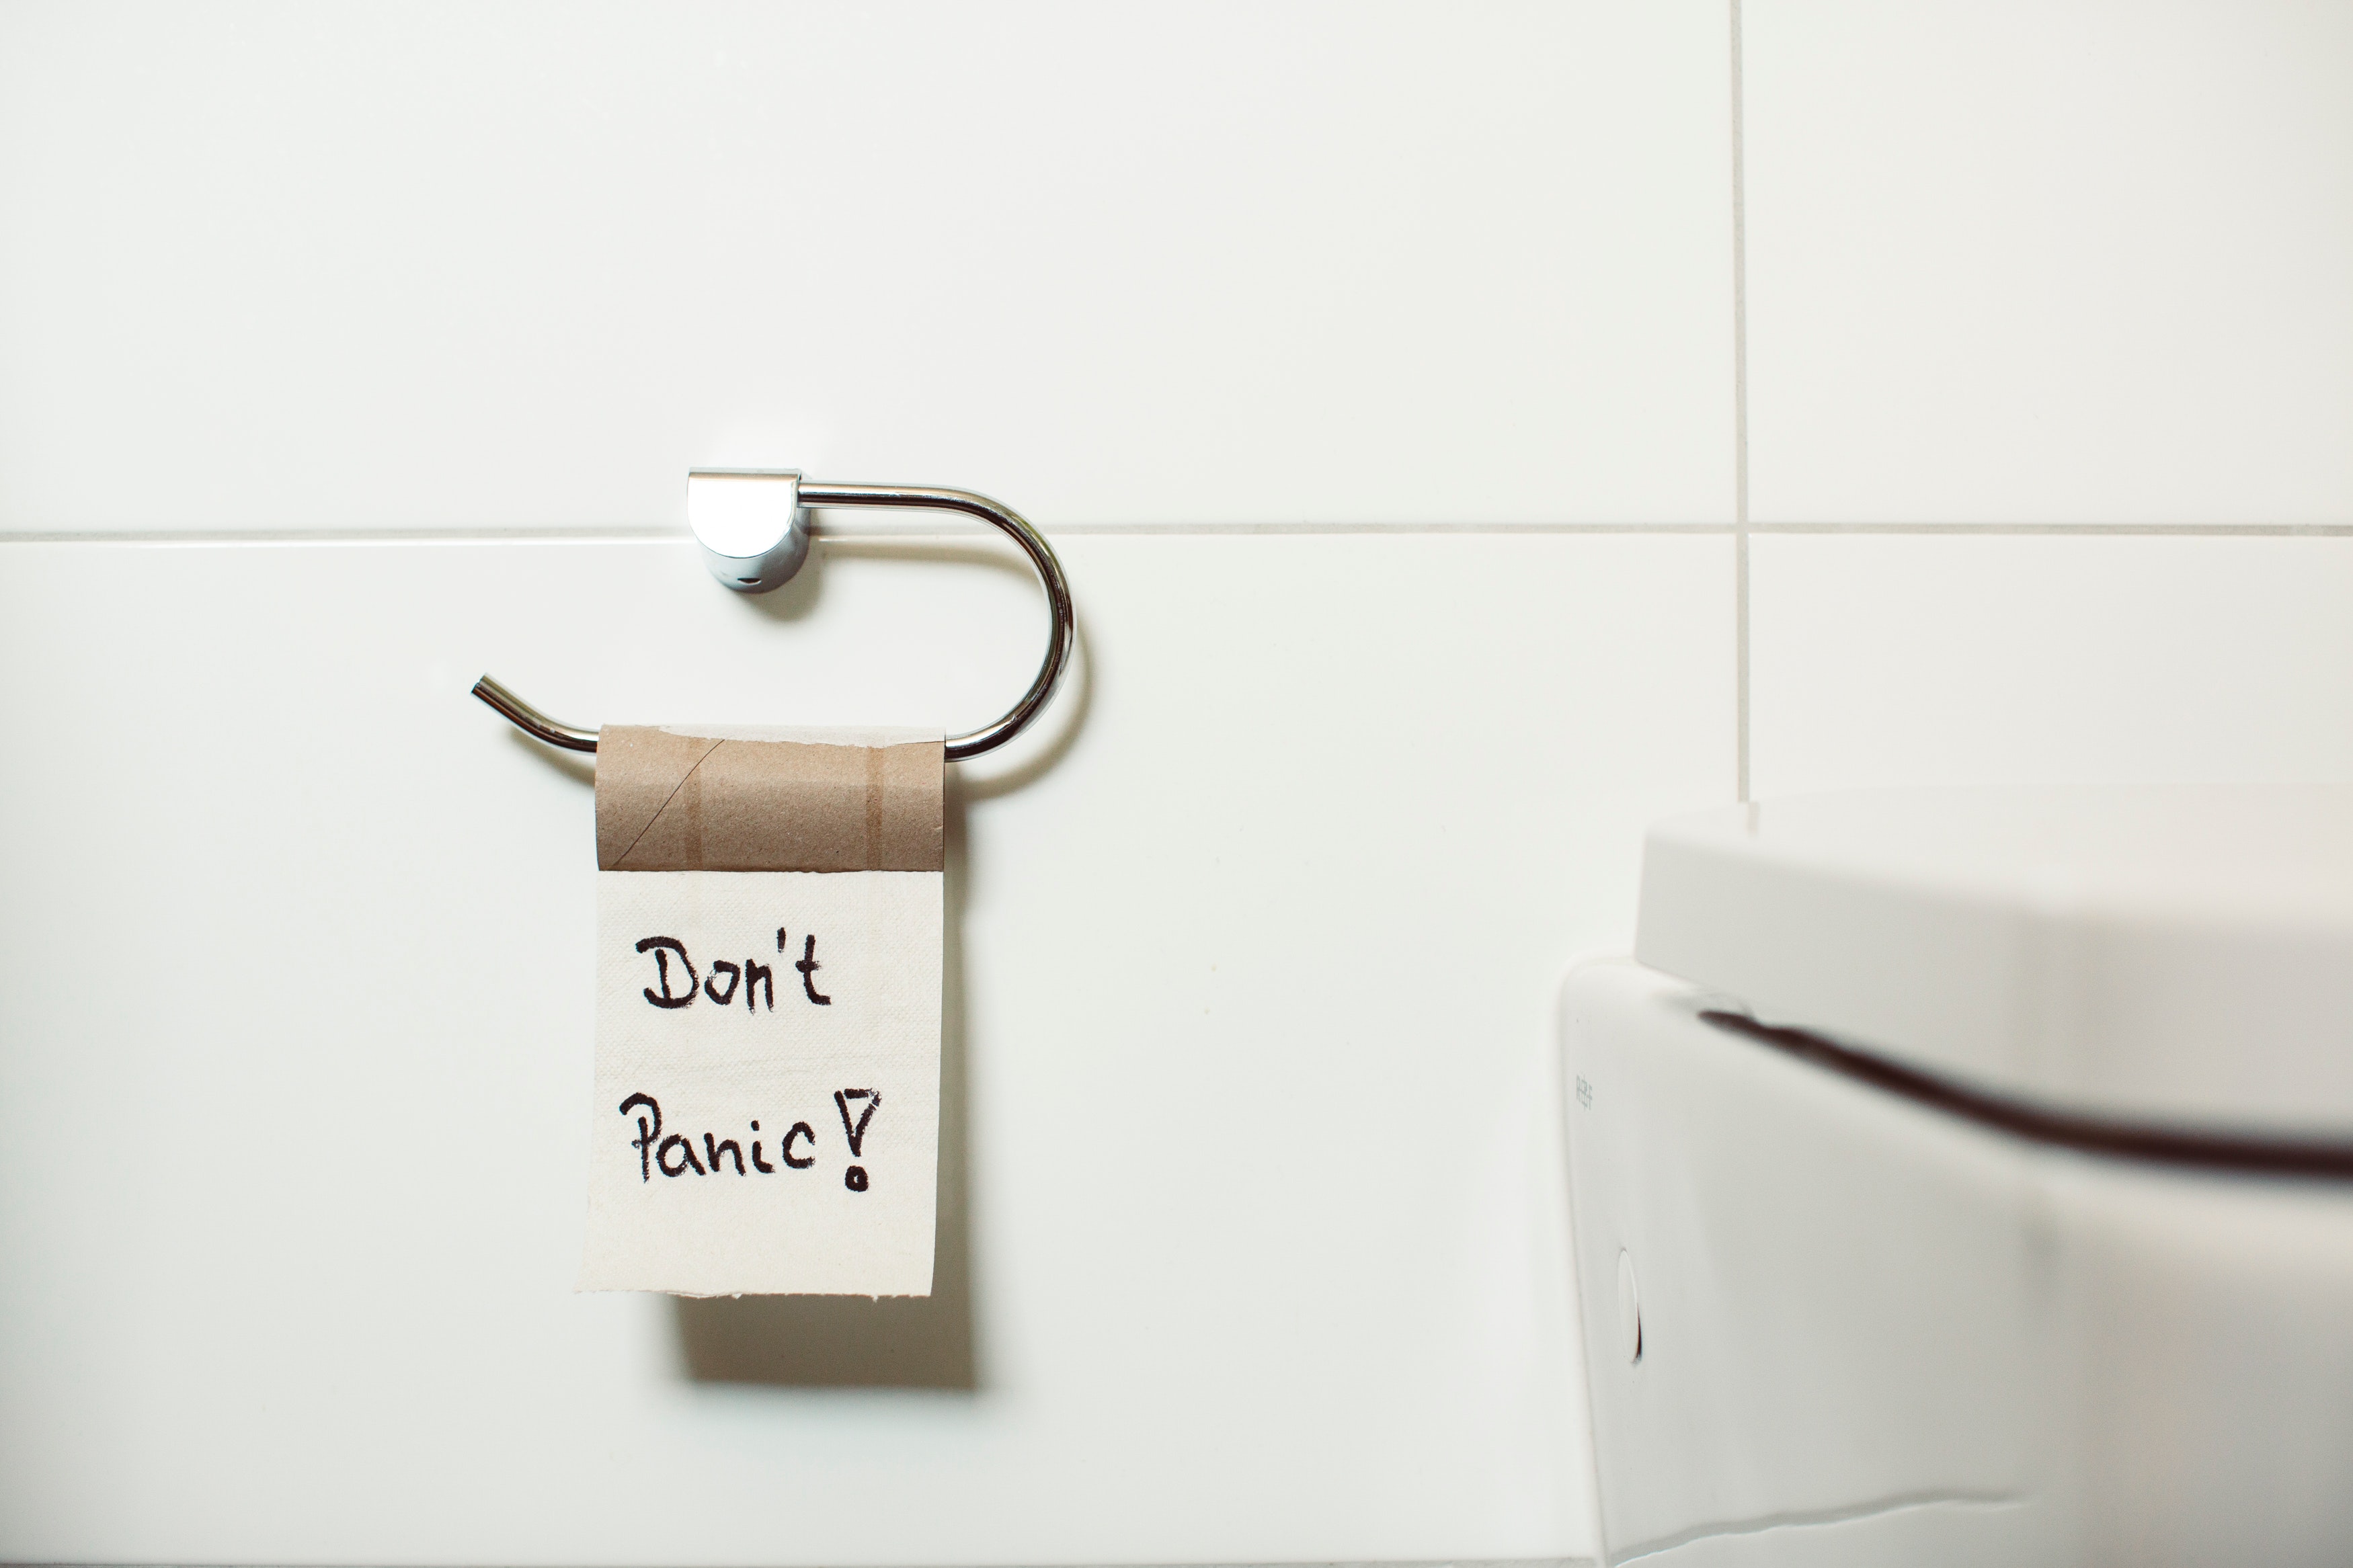 An almost finished toilet roll with the the text ’Don’t panic!’ written on the last sheet.